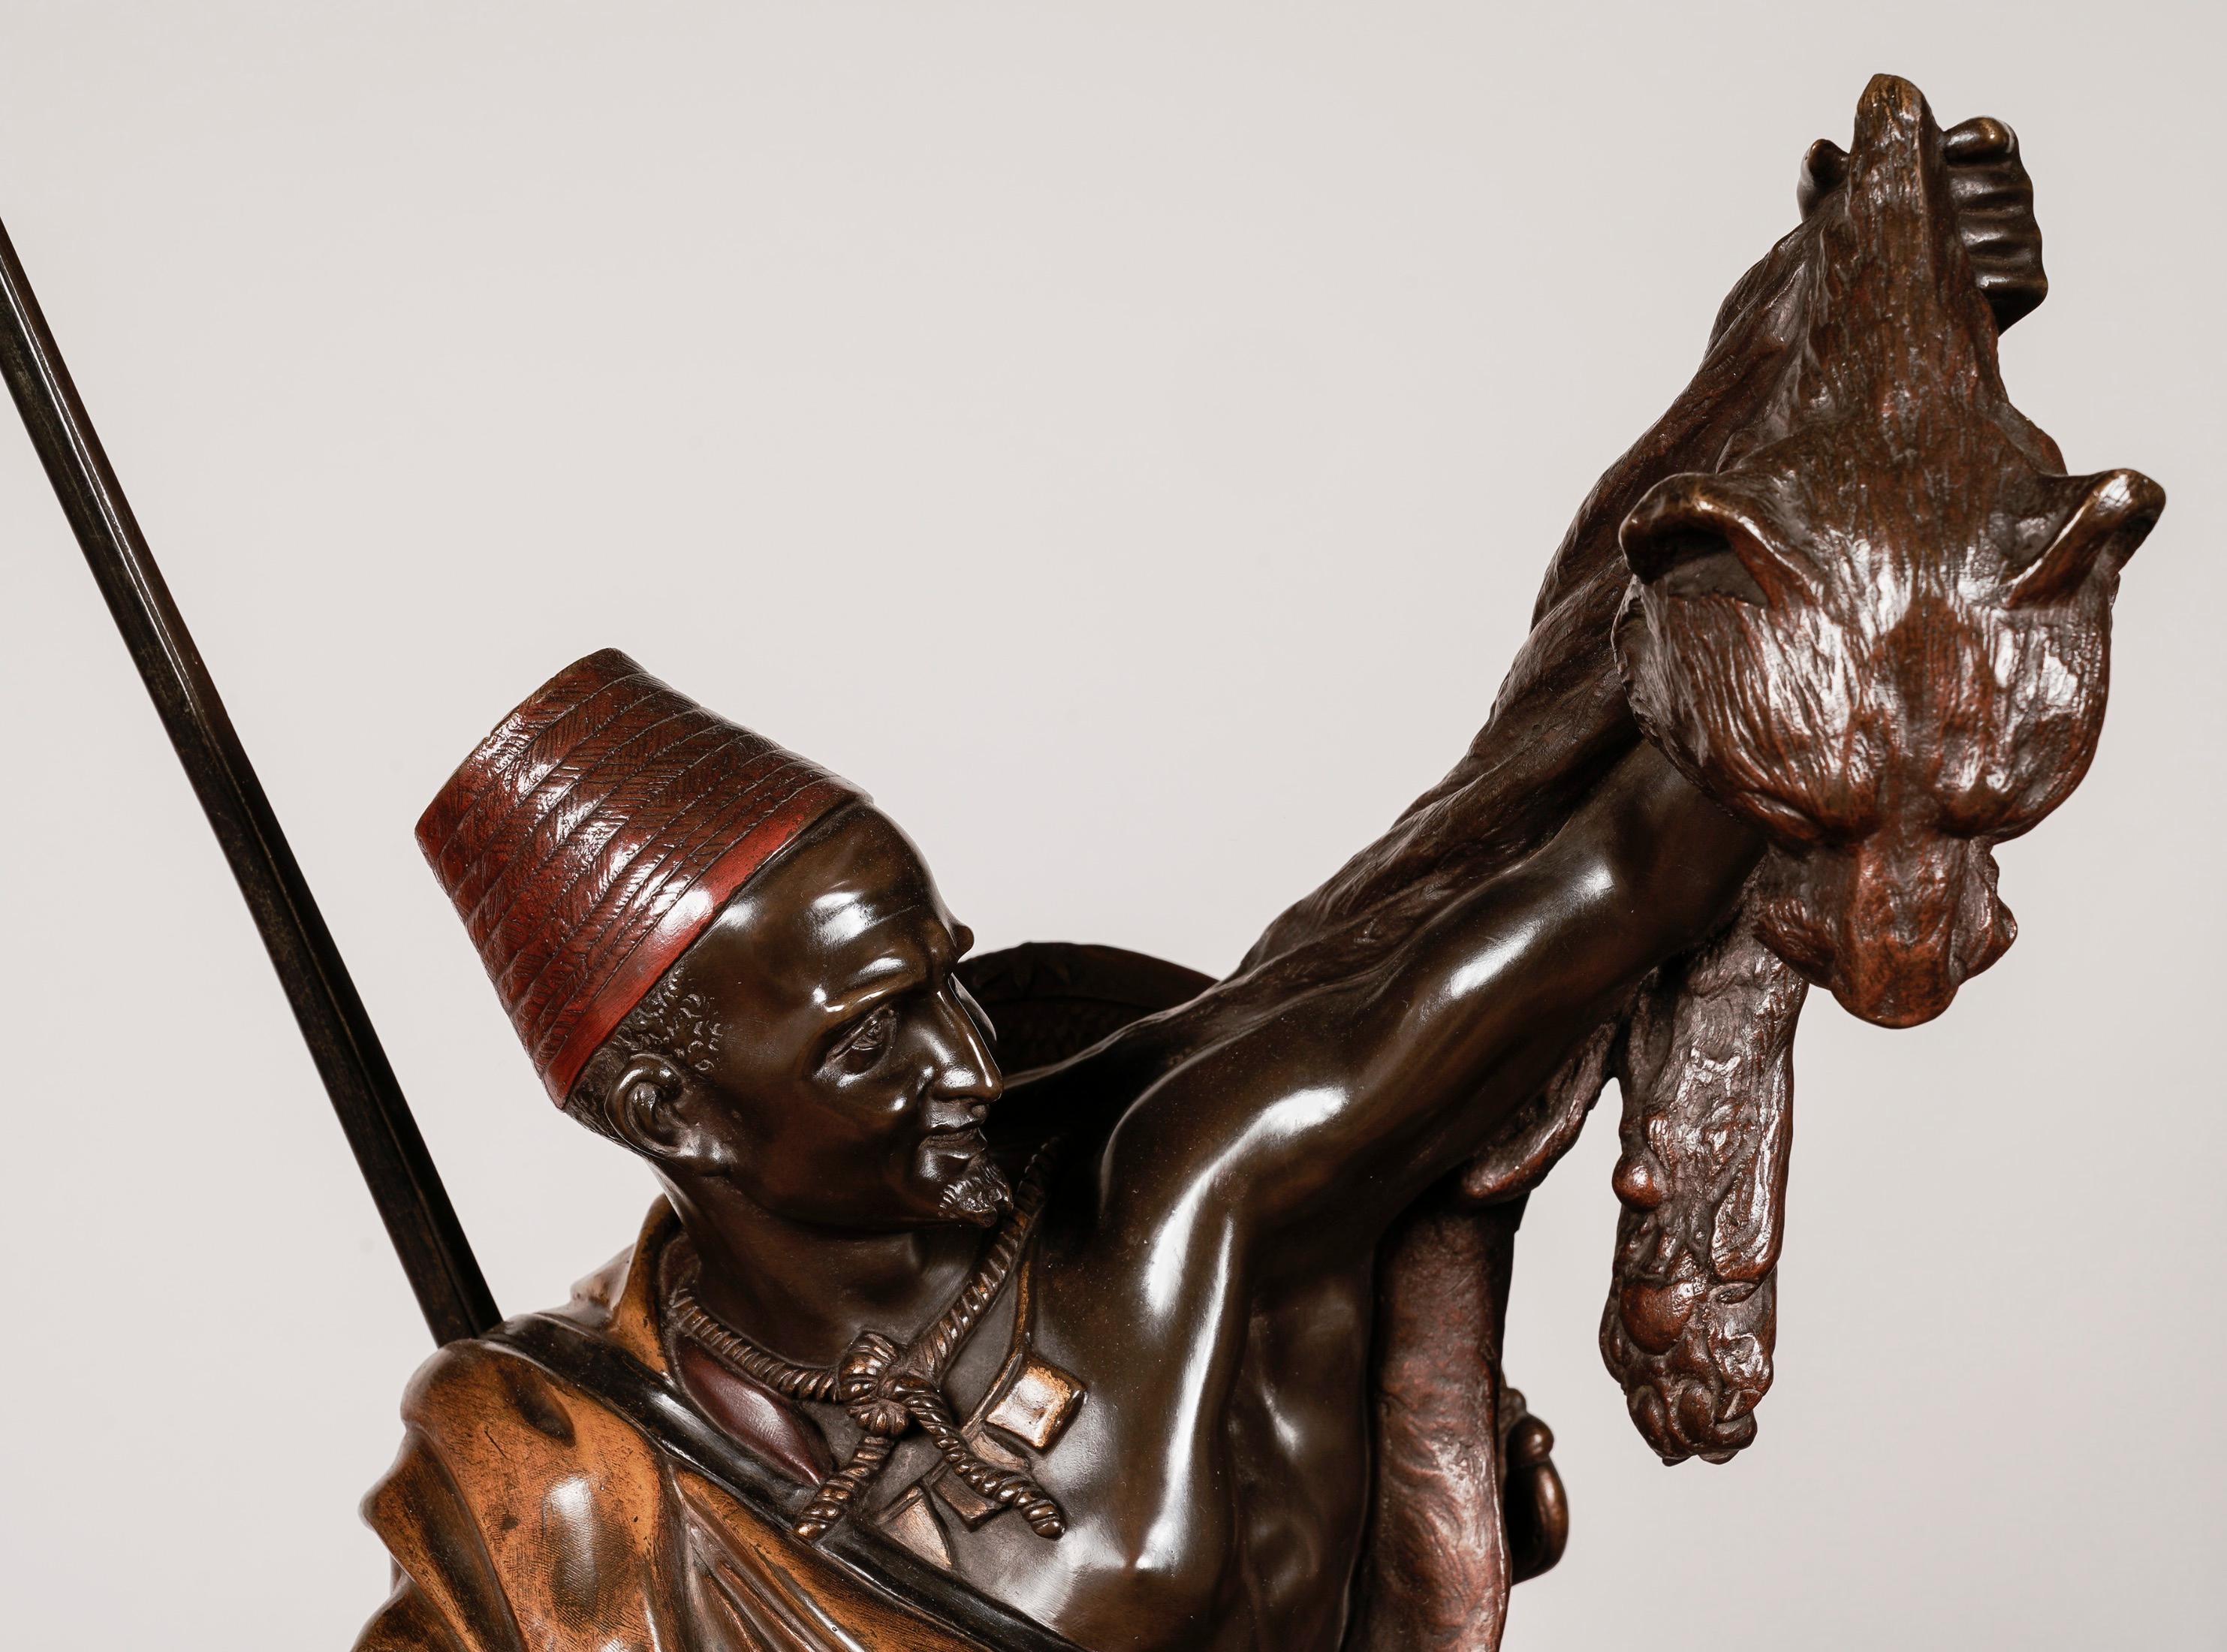 Kabyle au retour de la chasse
By Arthur Waagen

A rare example retaining its original cold-painted details in harmony with the patinated bronze; the impressive model of an Arab huntsman on horseback, holding up a lion's pelt while securing a